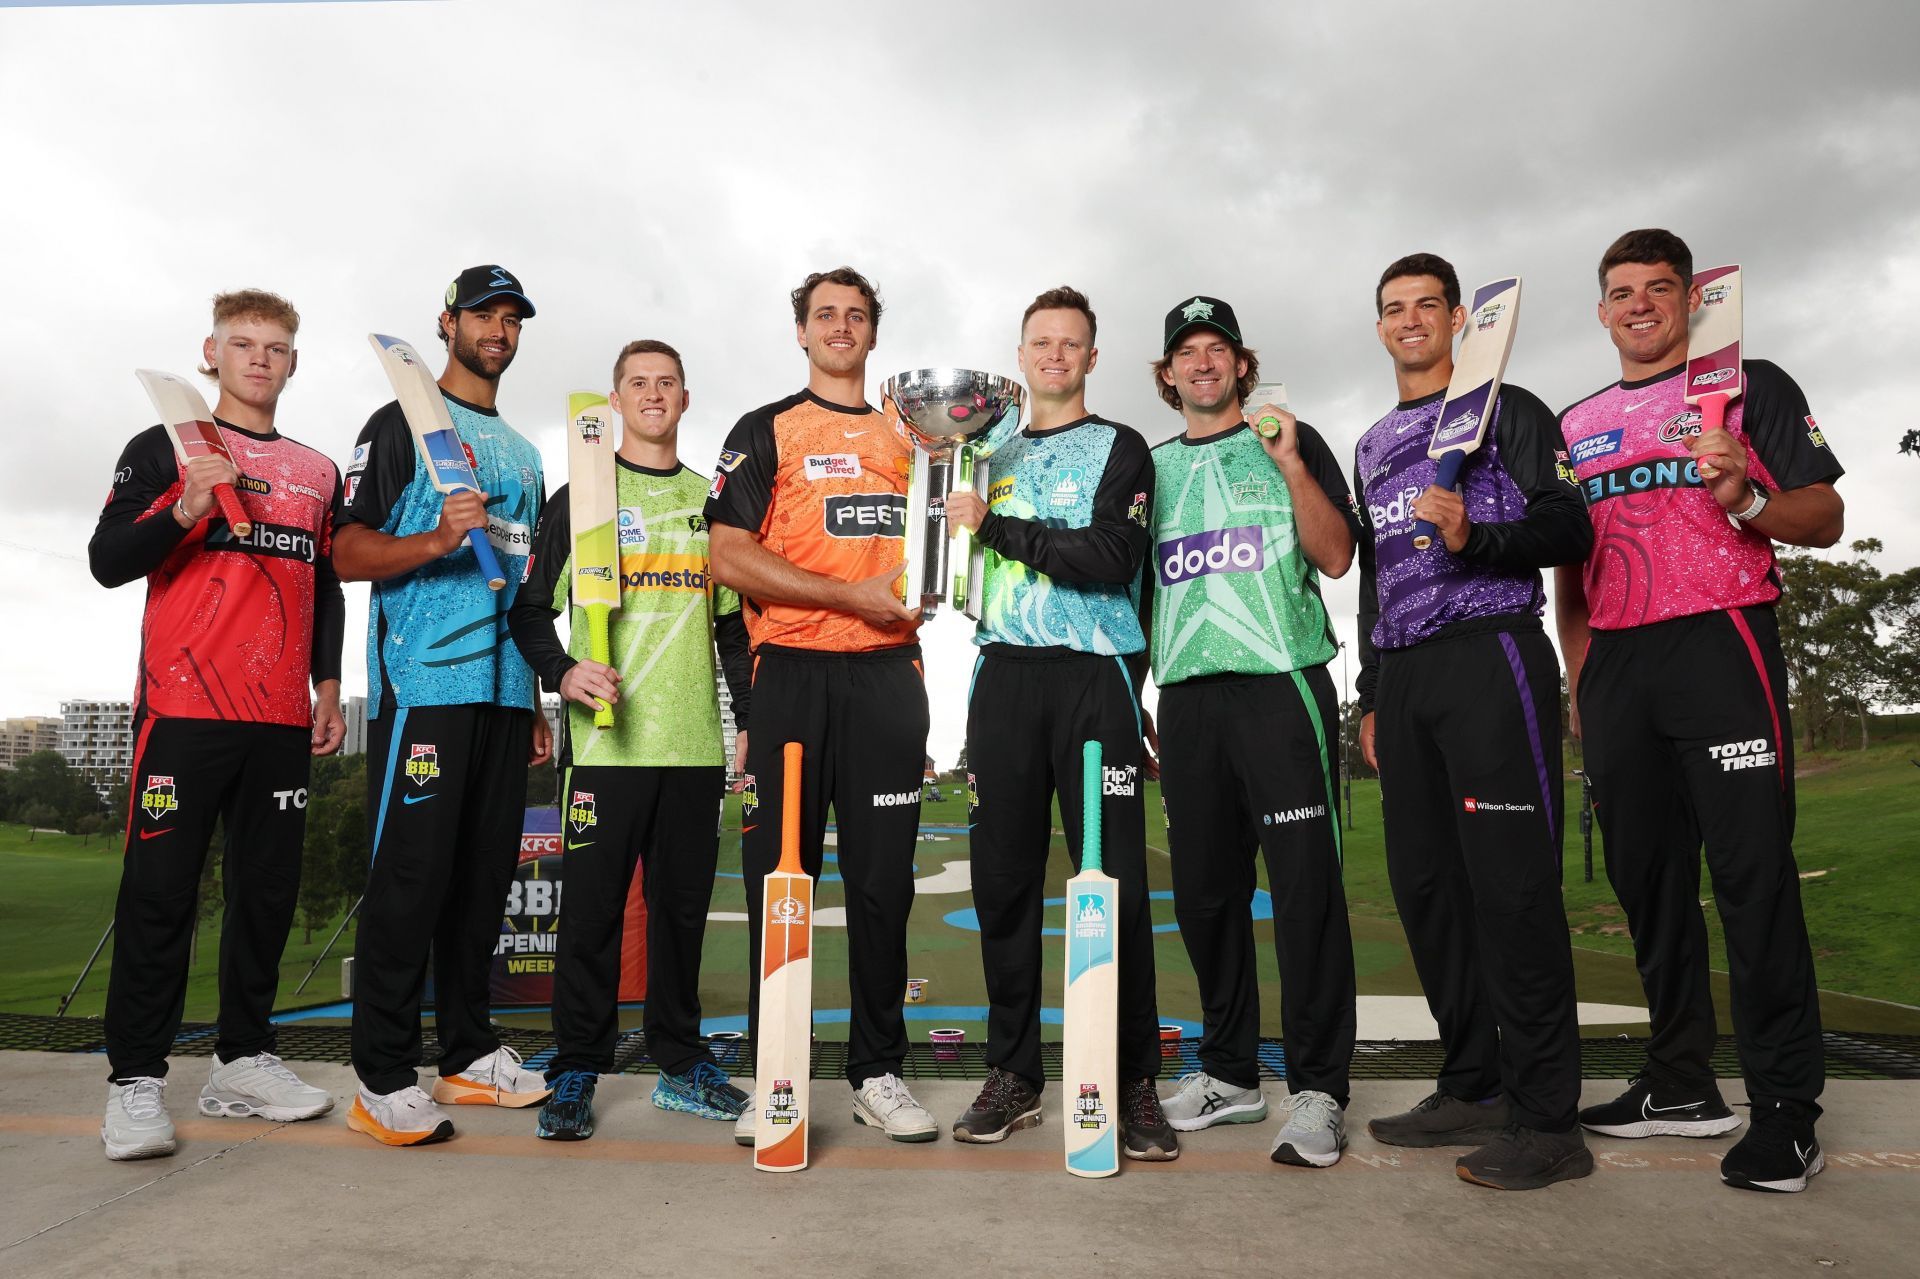 BBL captains posing with the BBL trophy